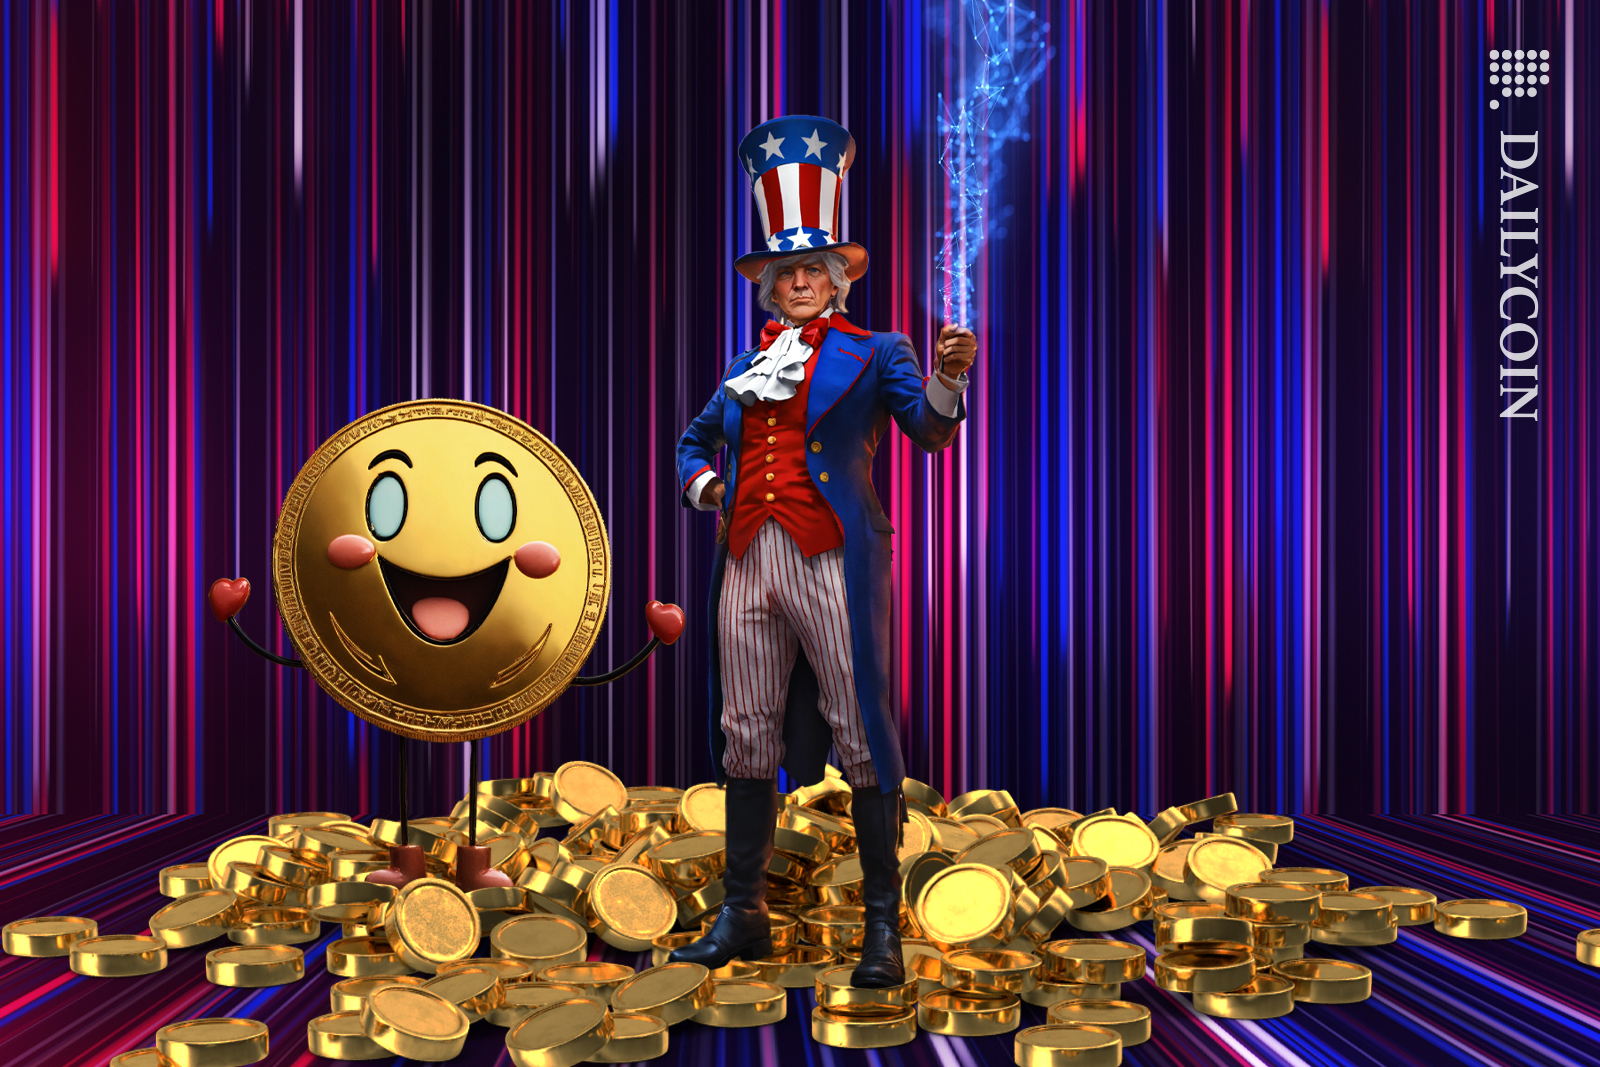 Uncle Sam character promoting DEFI, a Coin mascot is with him cheering.